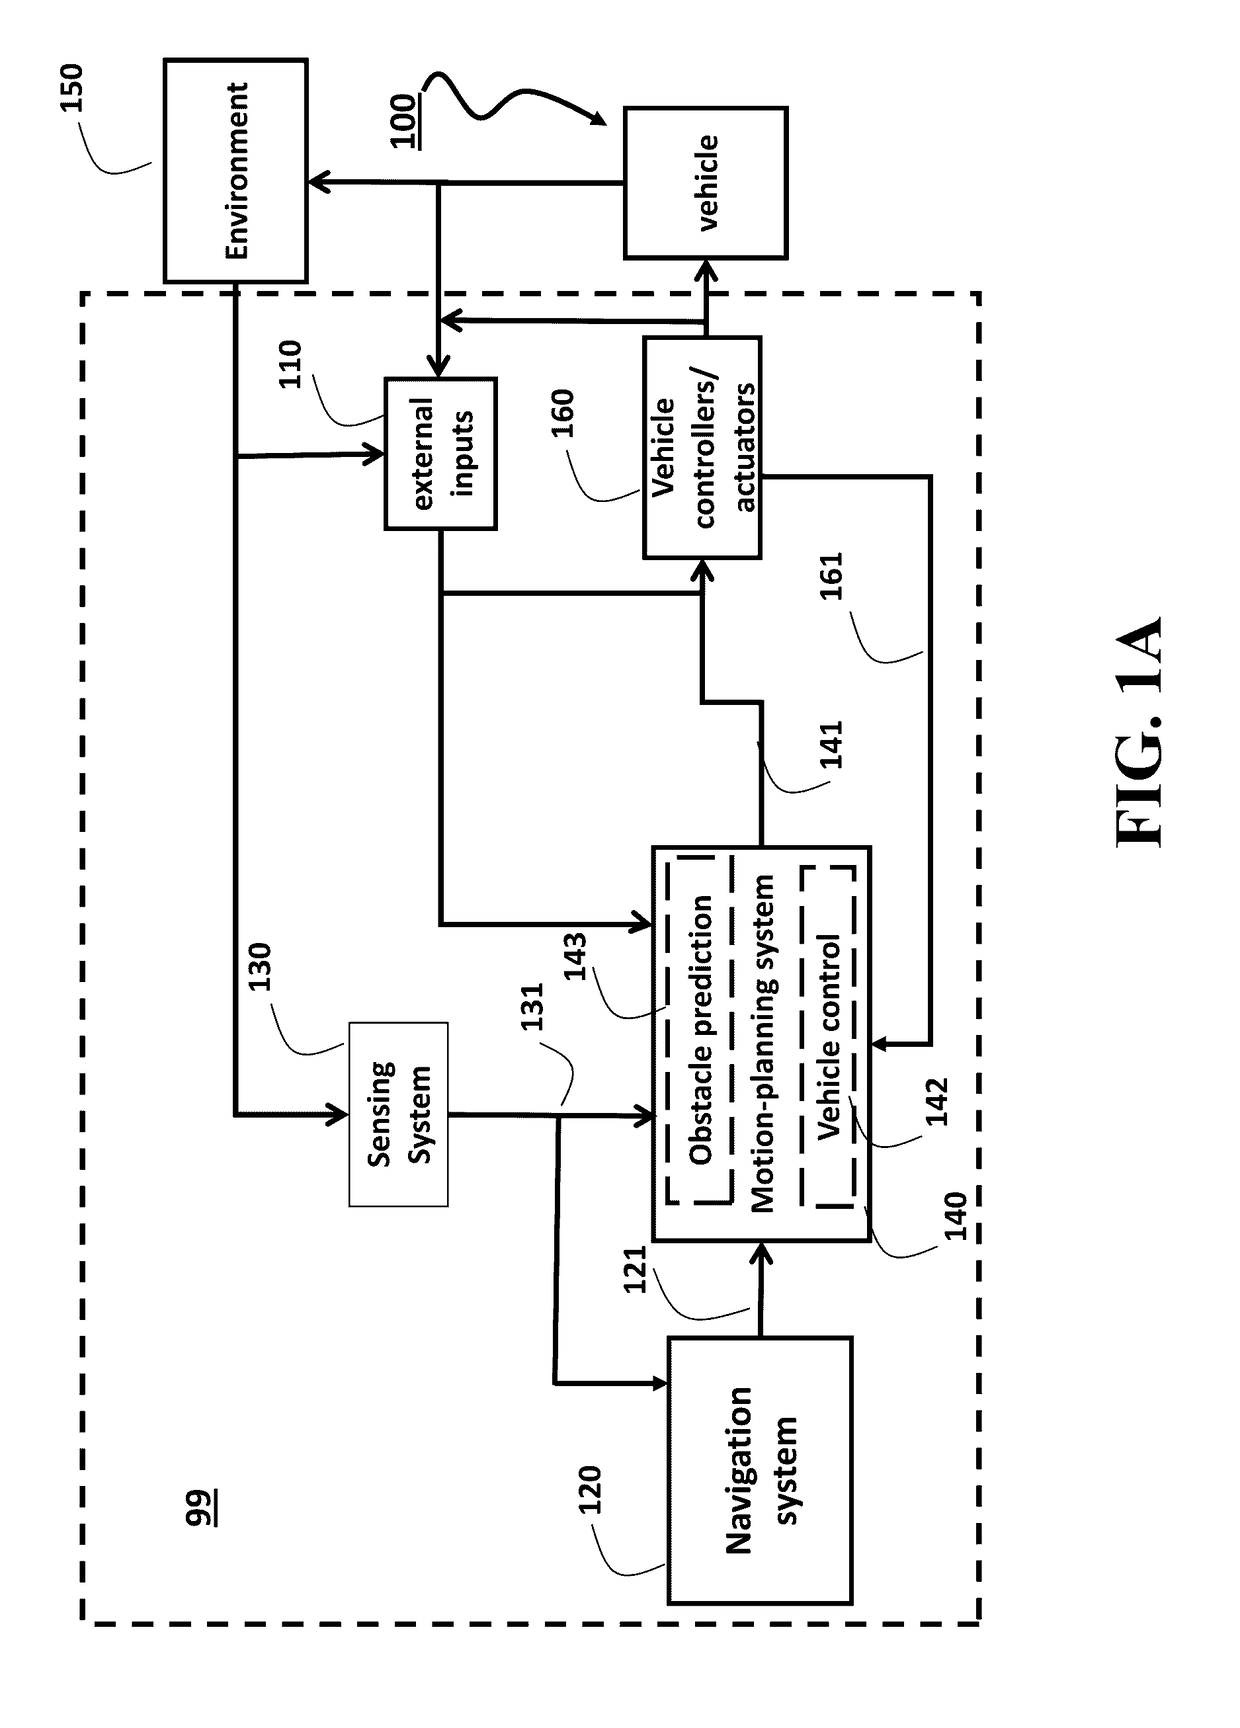 System and Method for Controlling Autonomous Vehicles